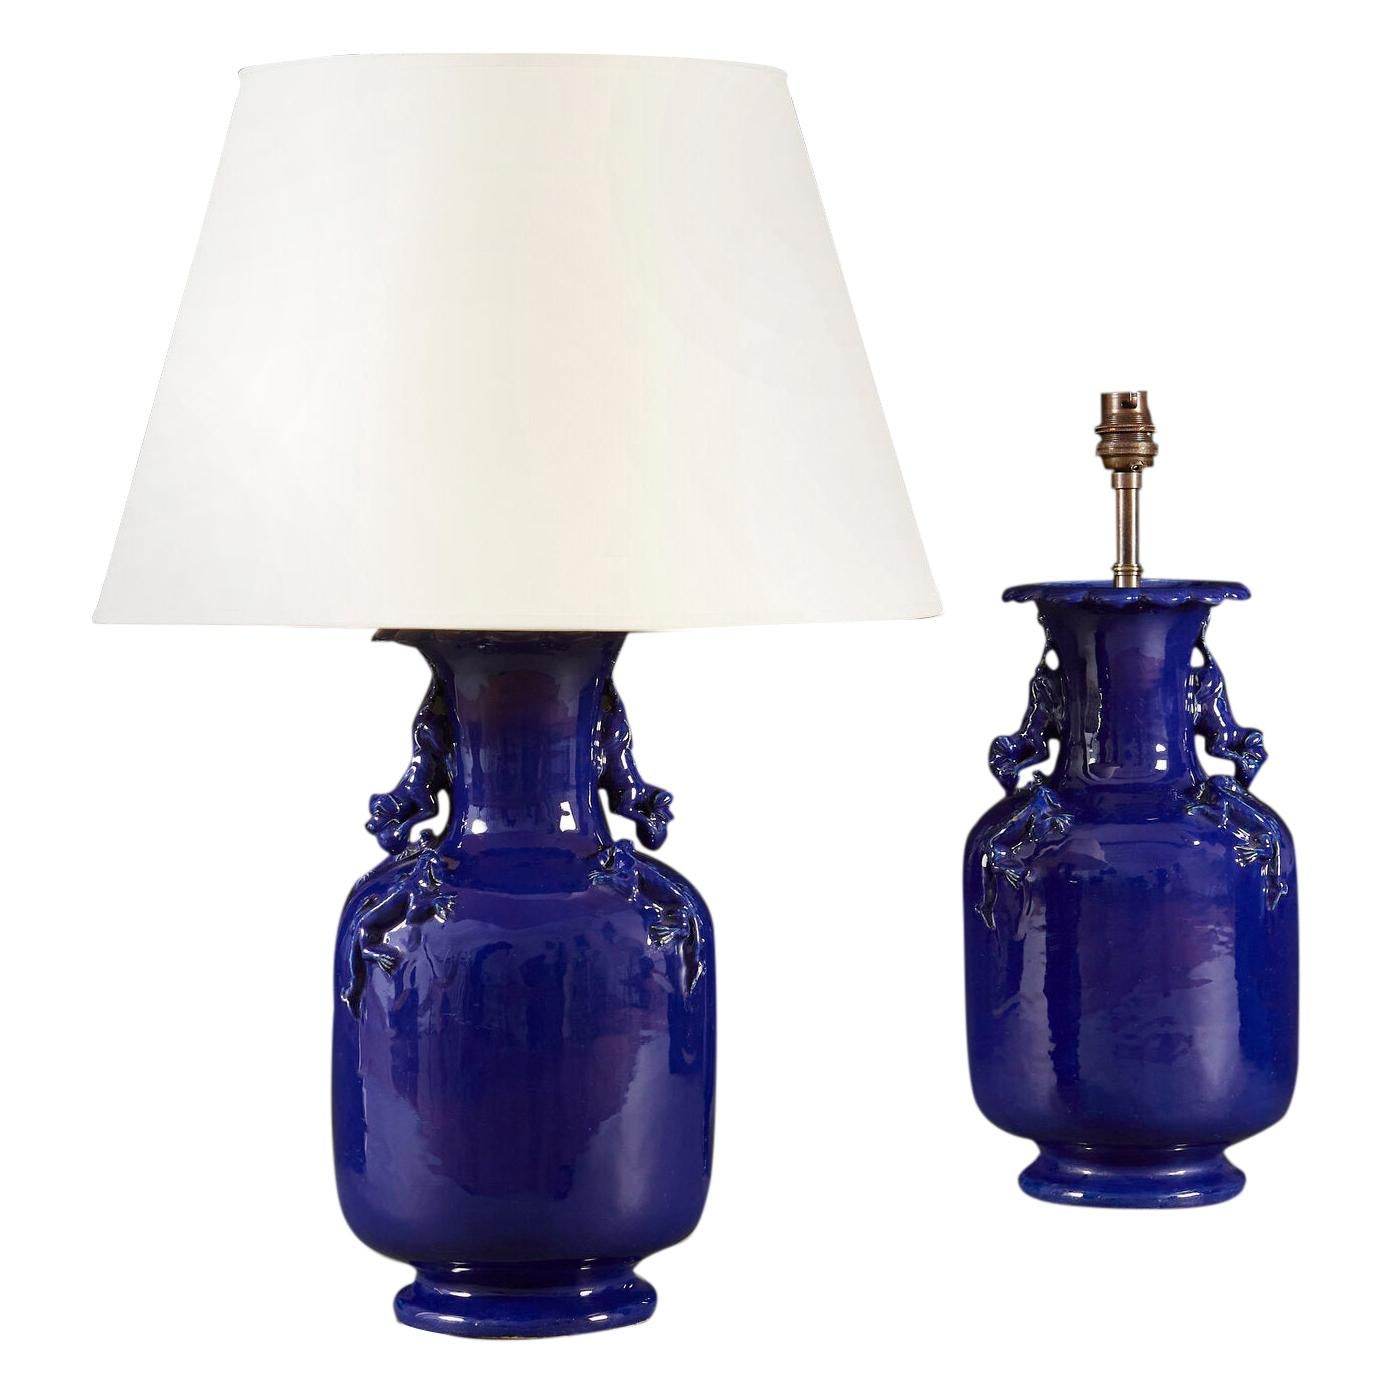 Pair of Mid 19th Century Blue French Dragon Vases as Table Lamps